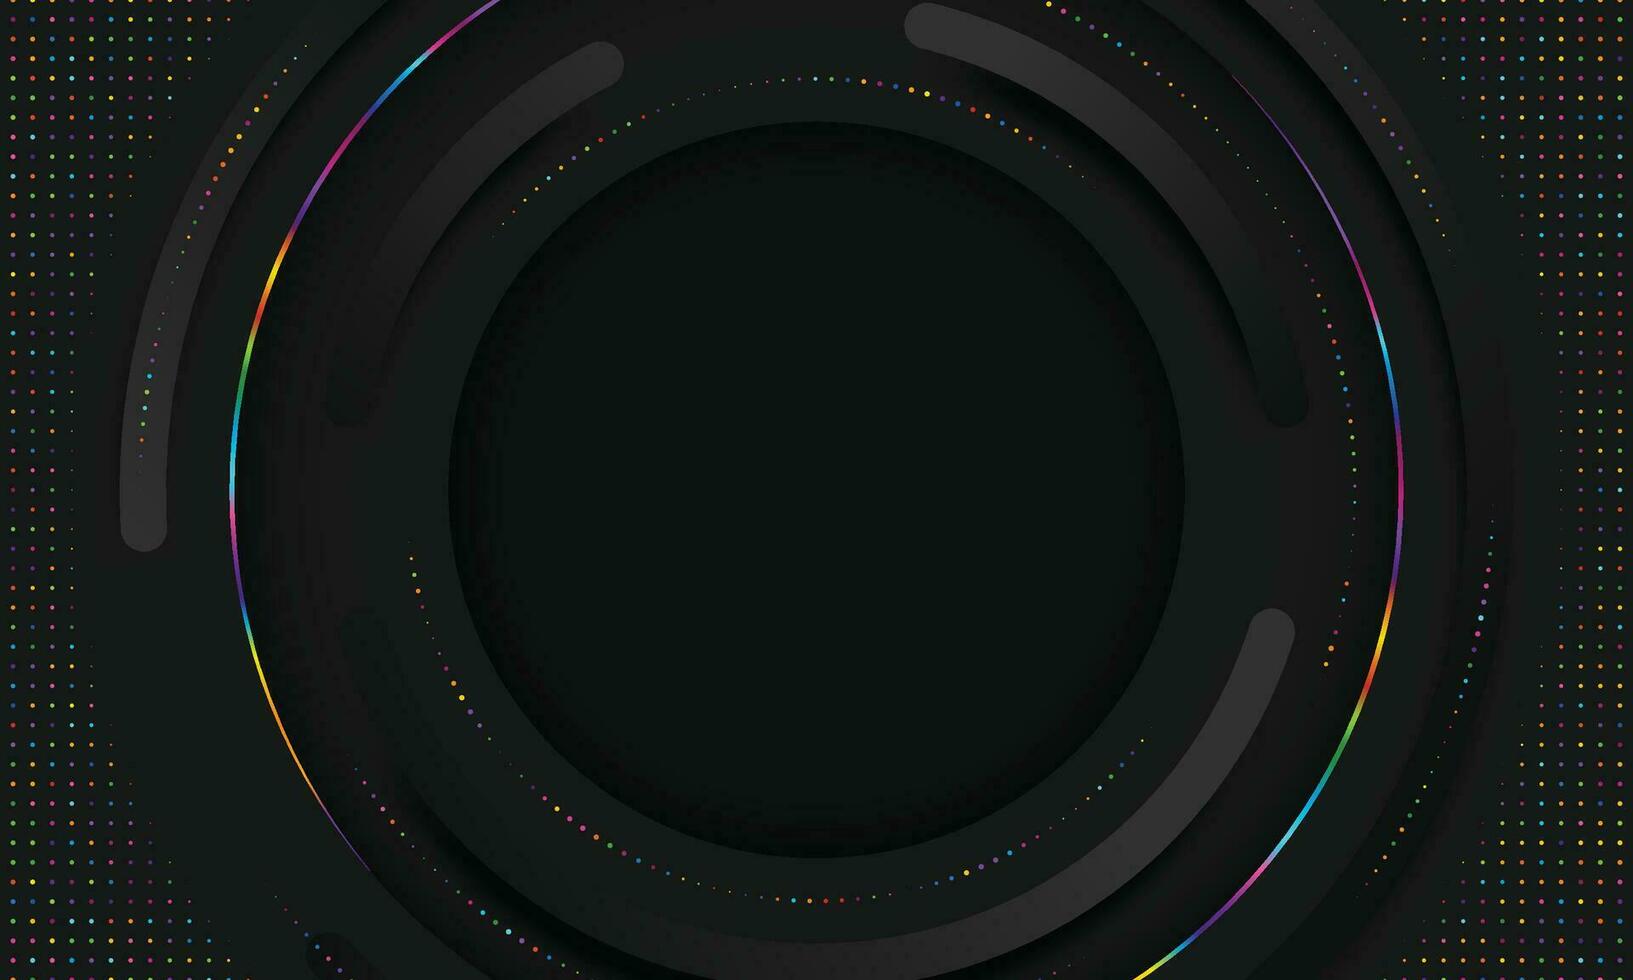 3D Vector Circles Minimalist Black Abstract Background With Blurred Effect. Circular Composition Dark Gray Minimalism Style Wallpaper. Dark Grey Technology Pattern Blank Backdrop For Business